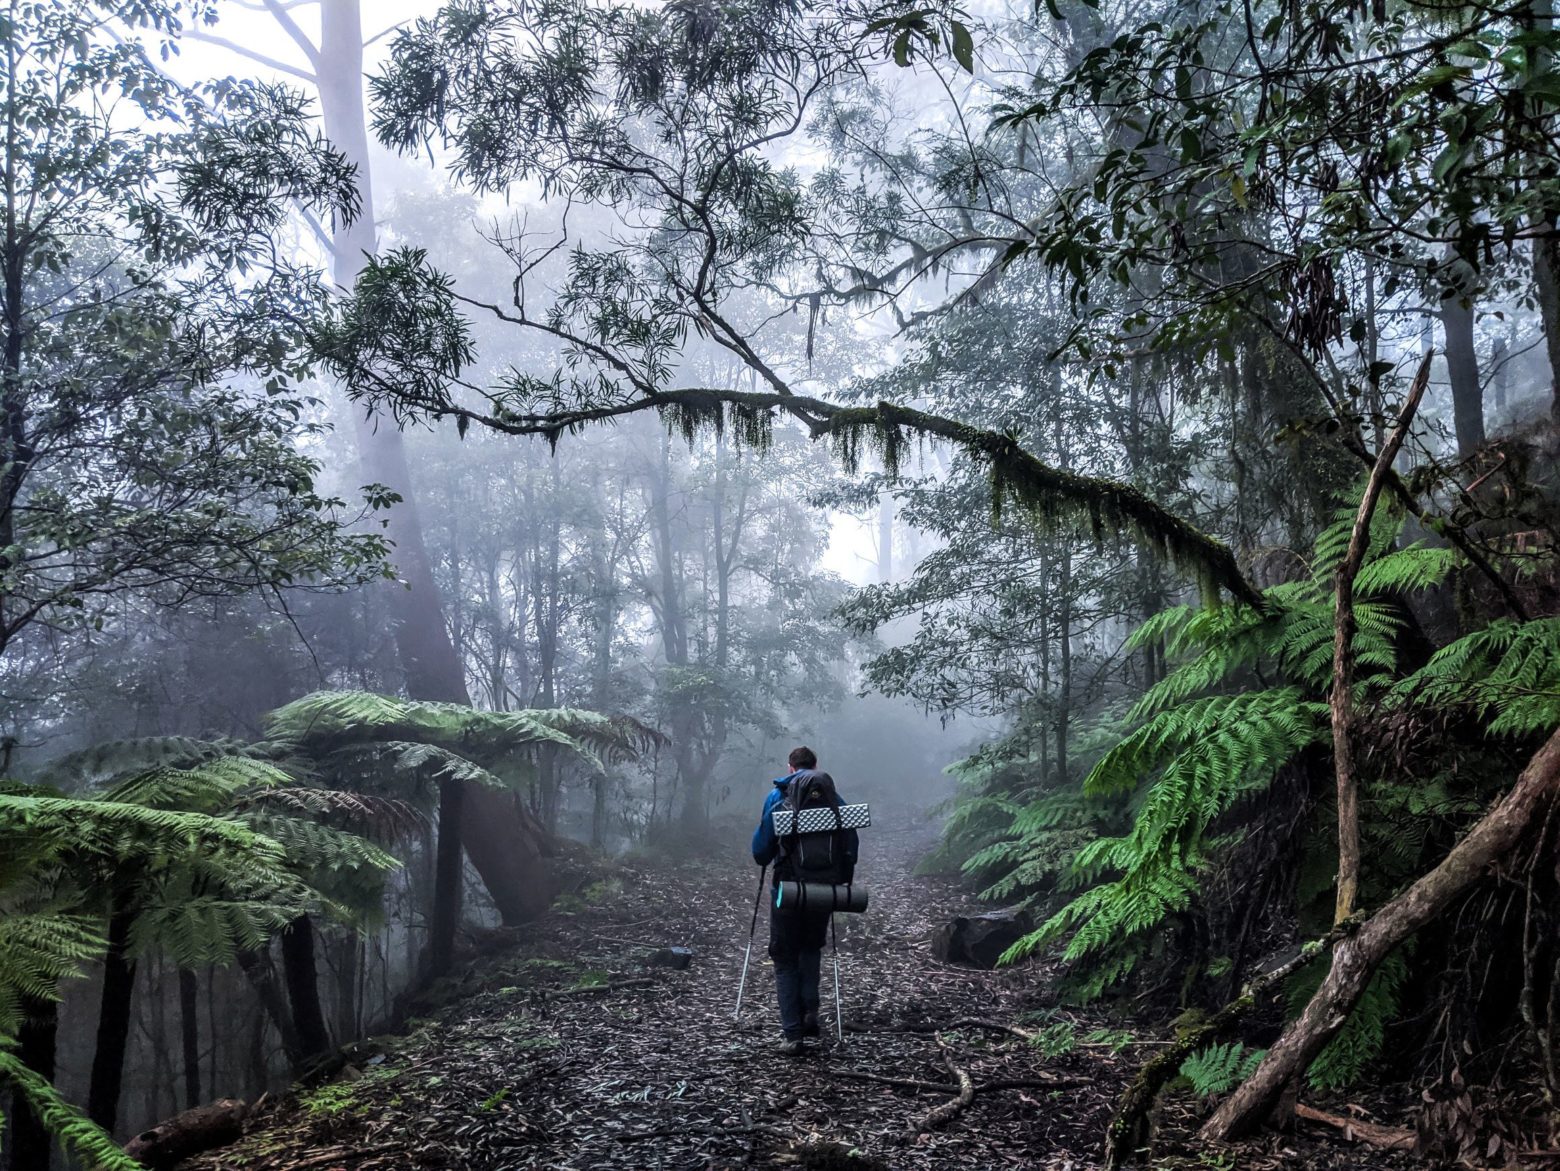 Corker Trail. Image: IG/@suzchell